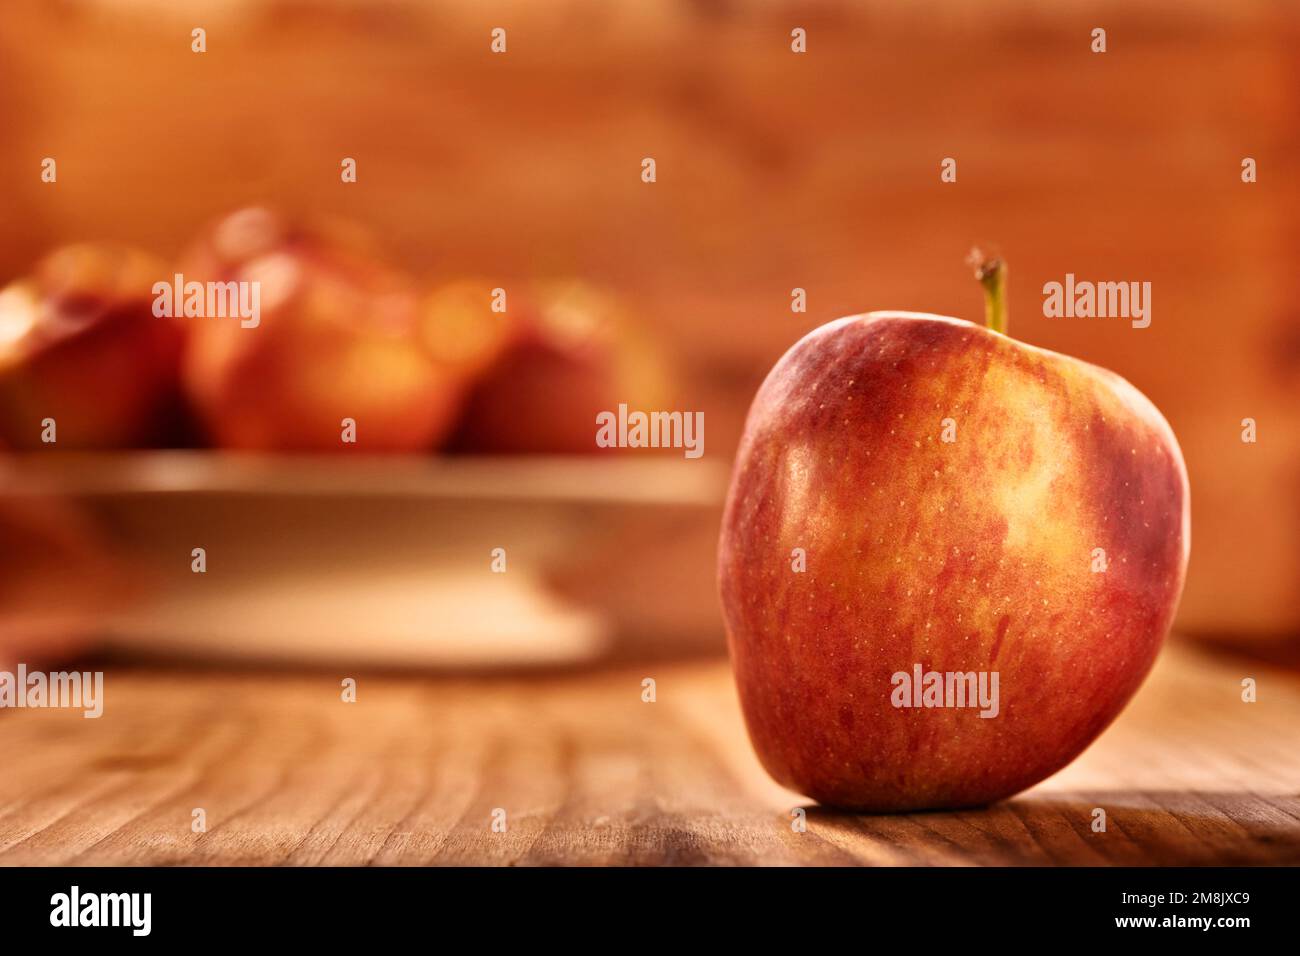 One red apple on wooden table , healthy eating Stock Photo